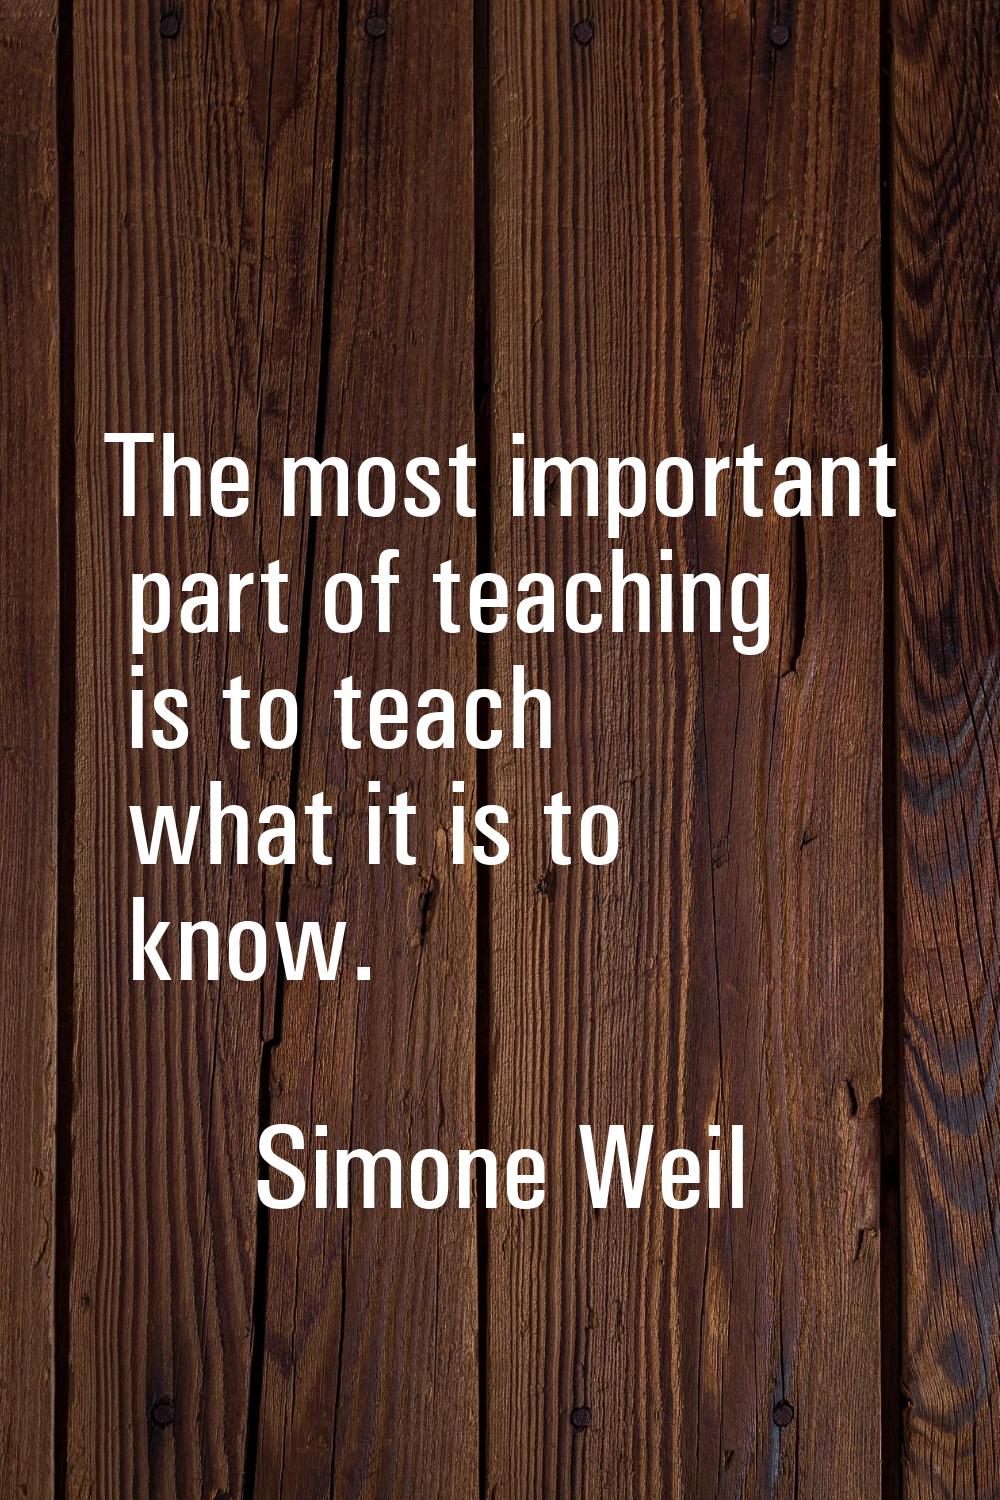 The most important part of teaching is to teach what it is to know.